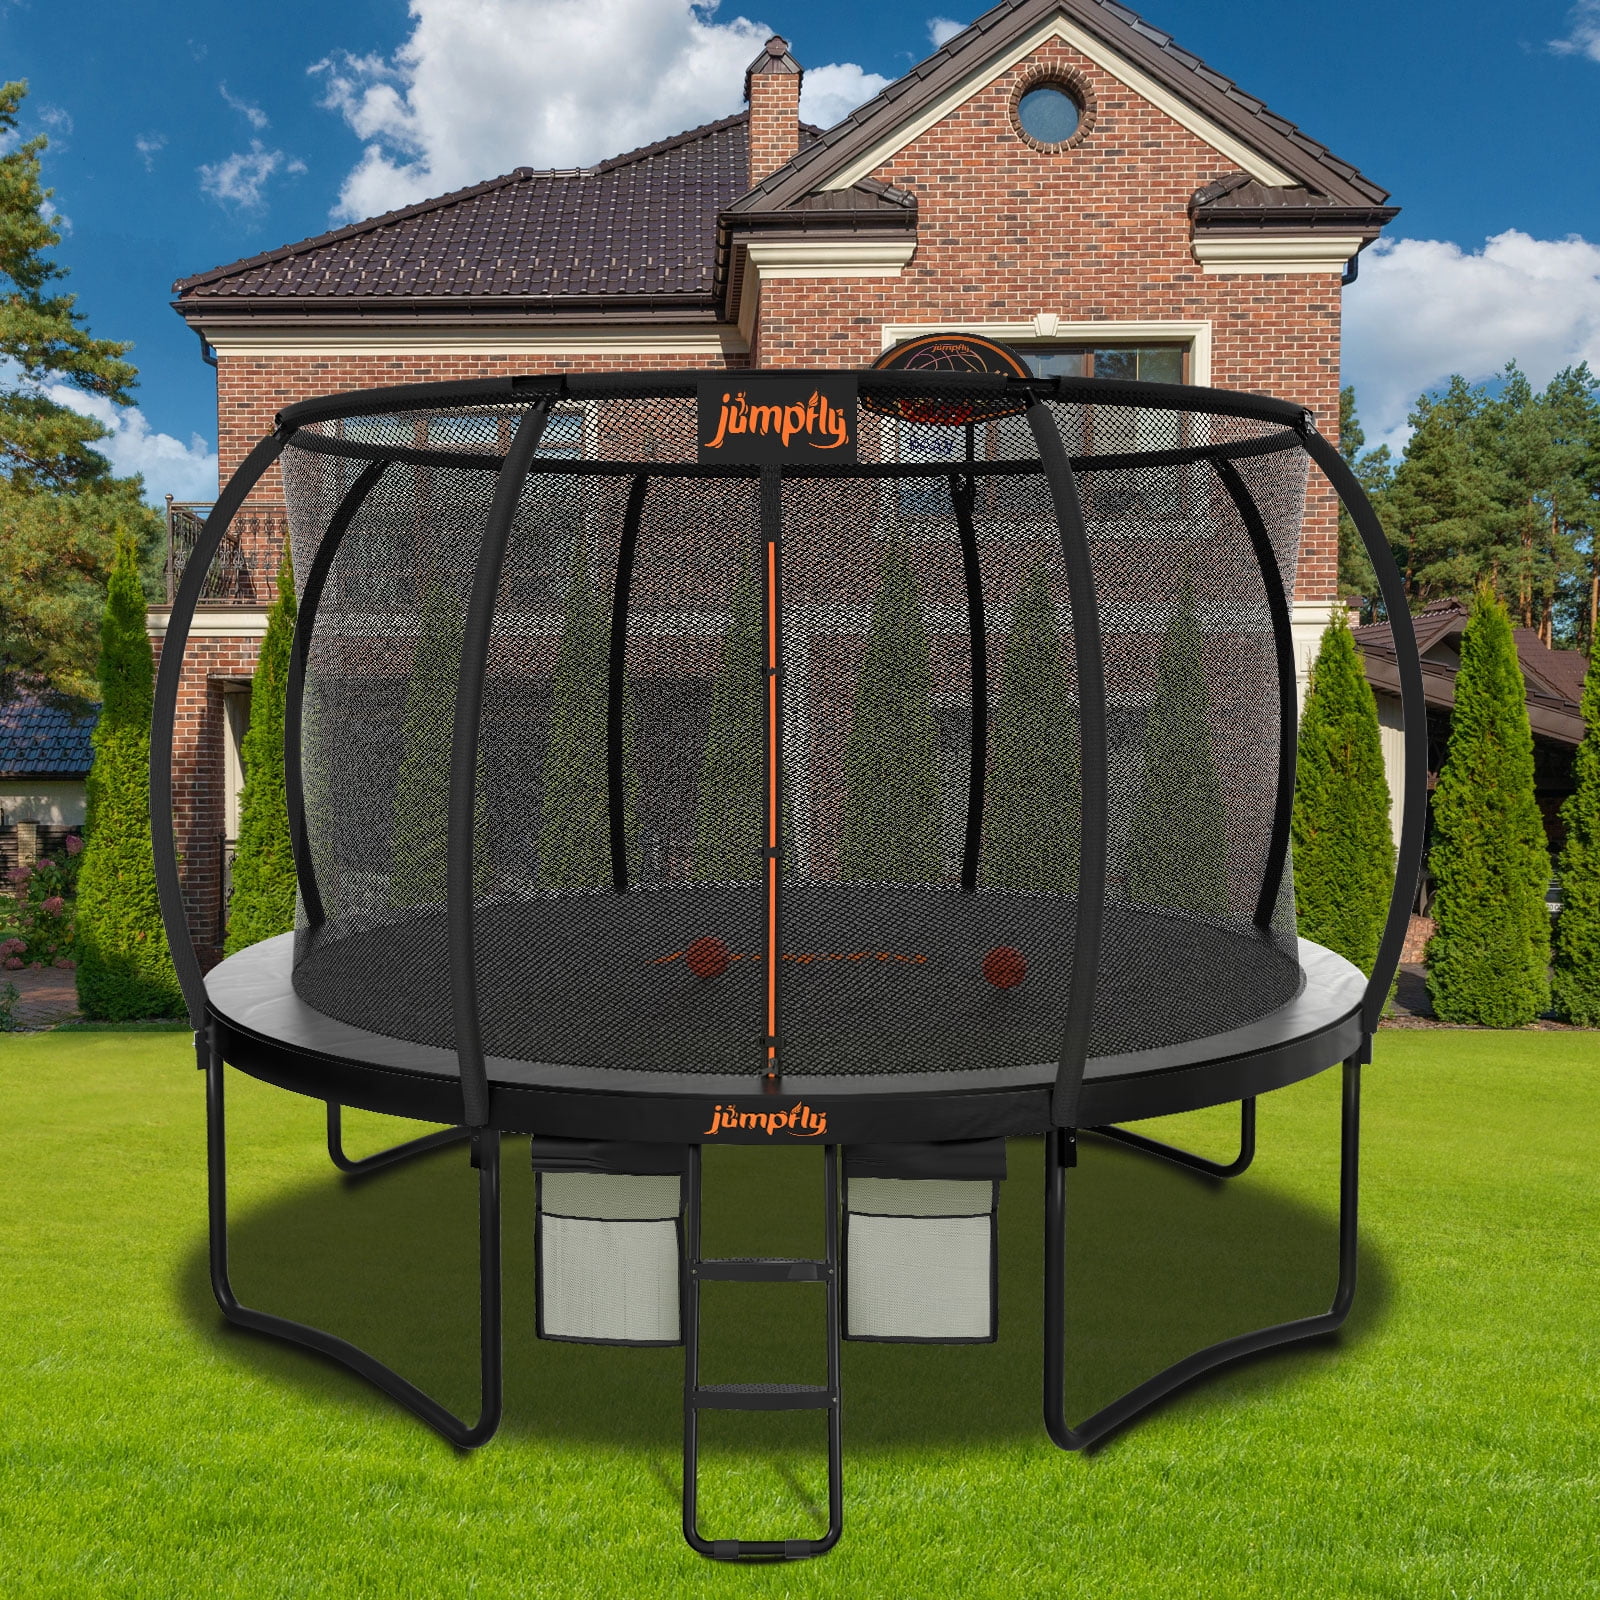 Jumpfly Trampoline 10FT Trampoline with Basketball Hoop-Curved Poles Recreational Trampolines with Enclosure And Ladder - ASTM Approval- Outdoor Trampoline for - Walmart.com